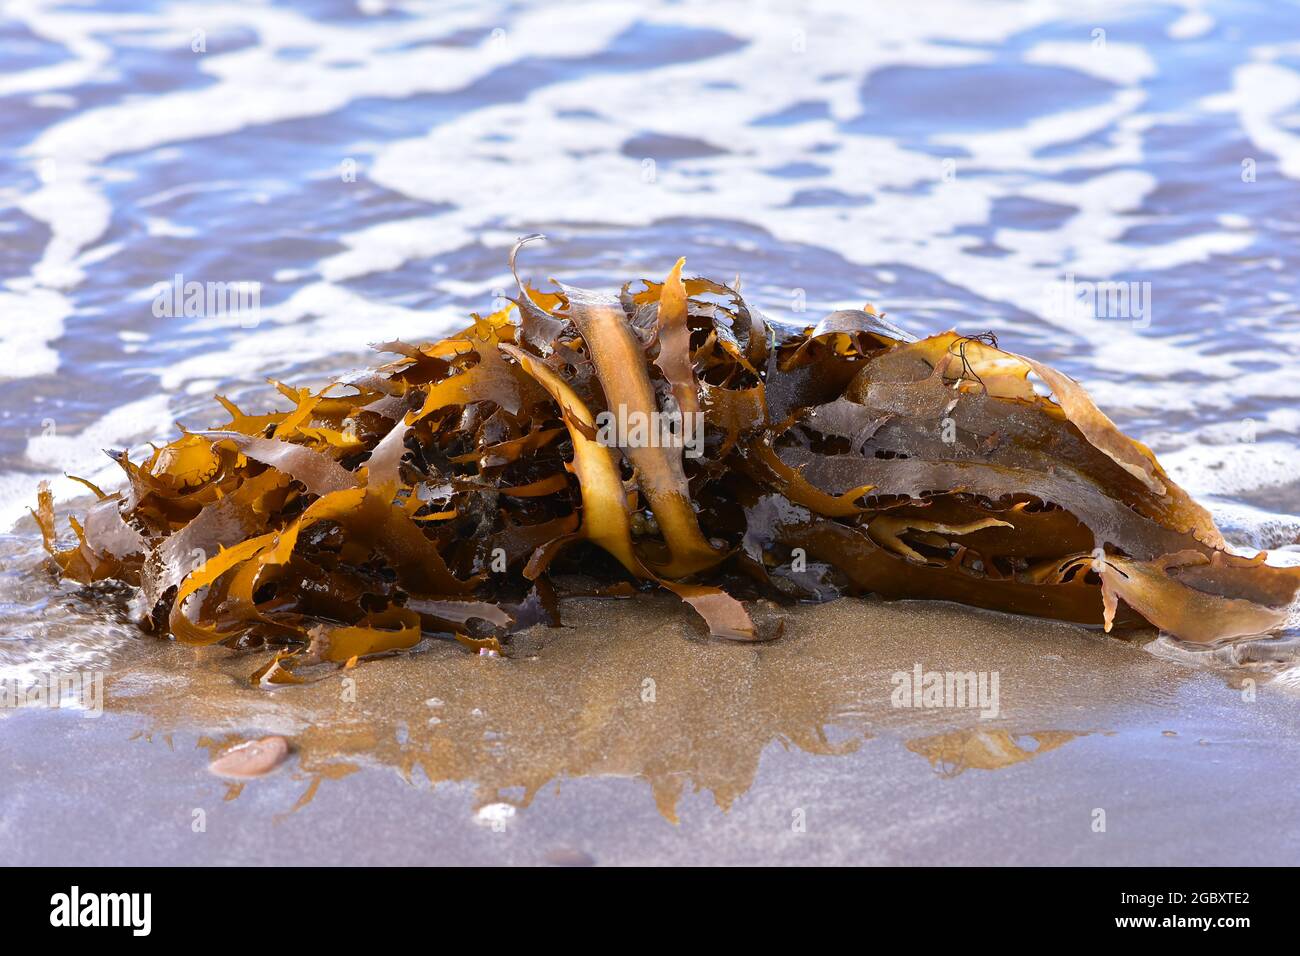 Fronds of hard brown kelp on patch of wet beach sand with shallow water around. Stock Photo